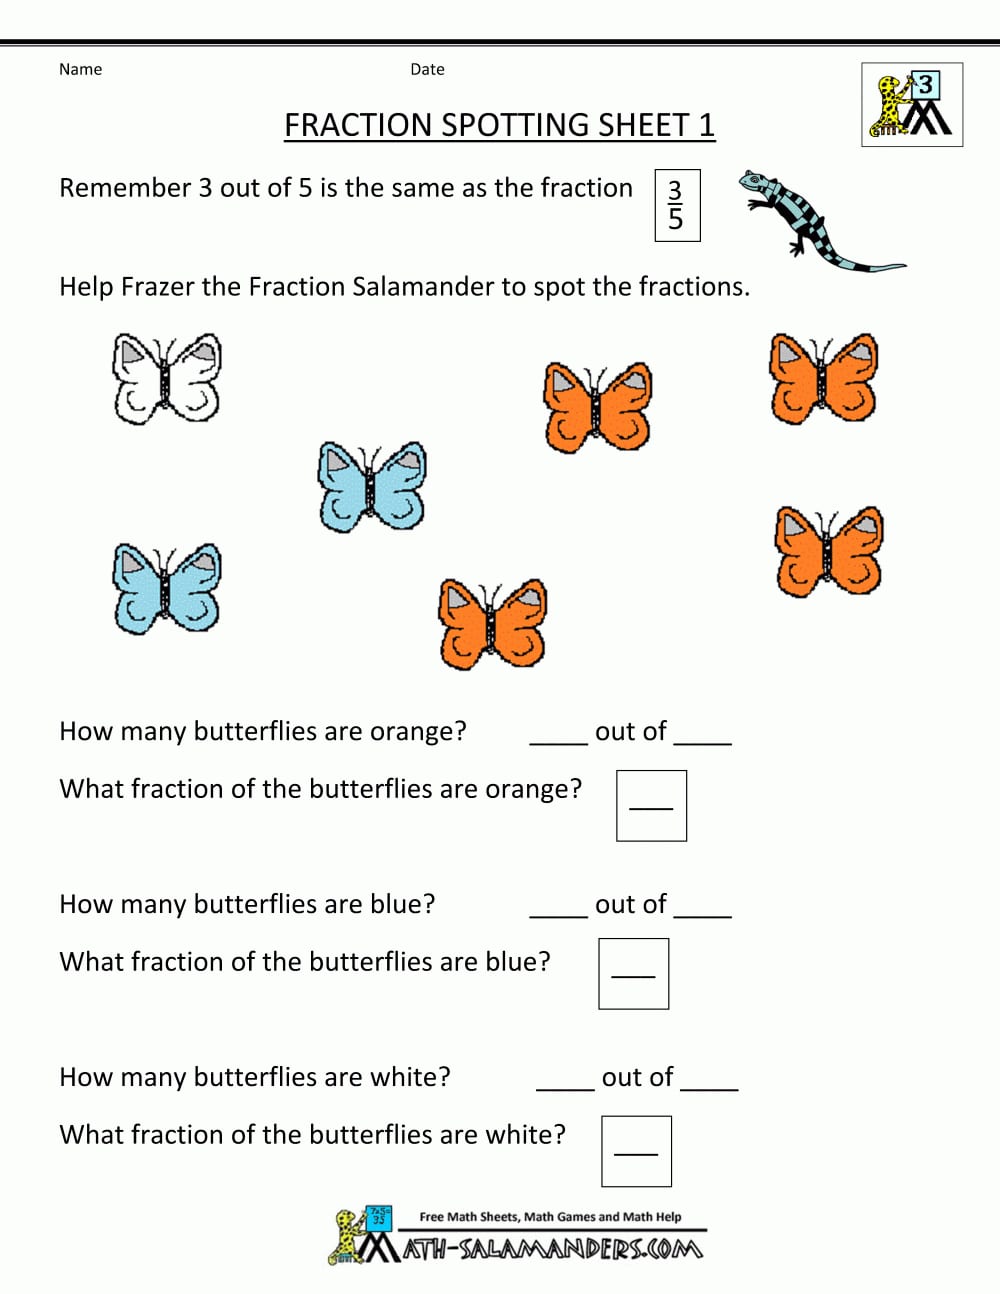 Finding Fractions  Fraction Spotting Throughout 3Rd Grade Math Fractions Worksheets